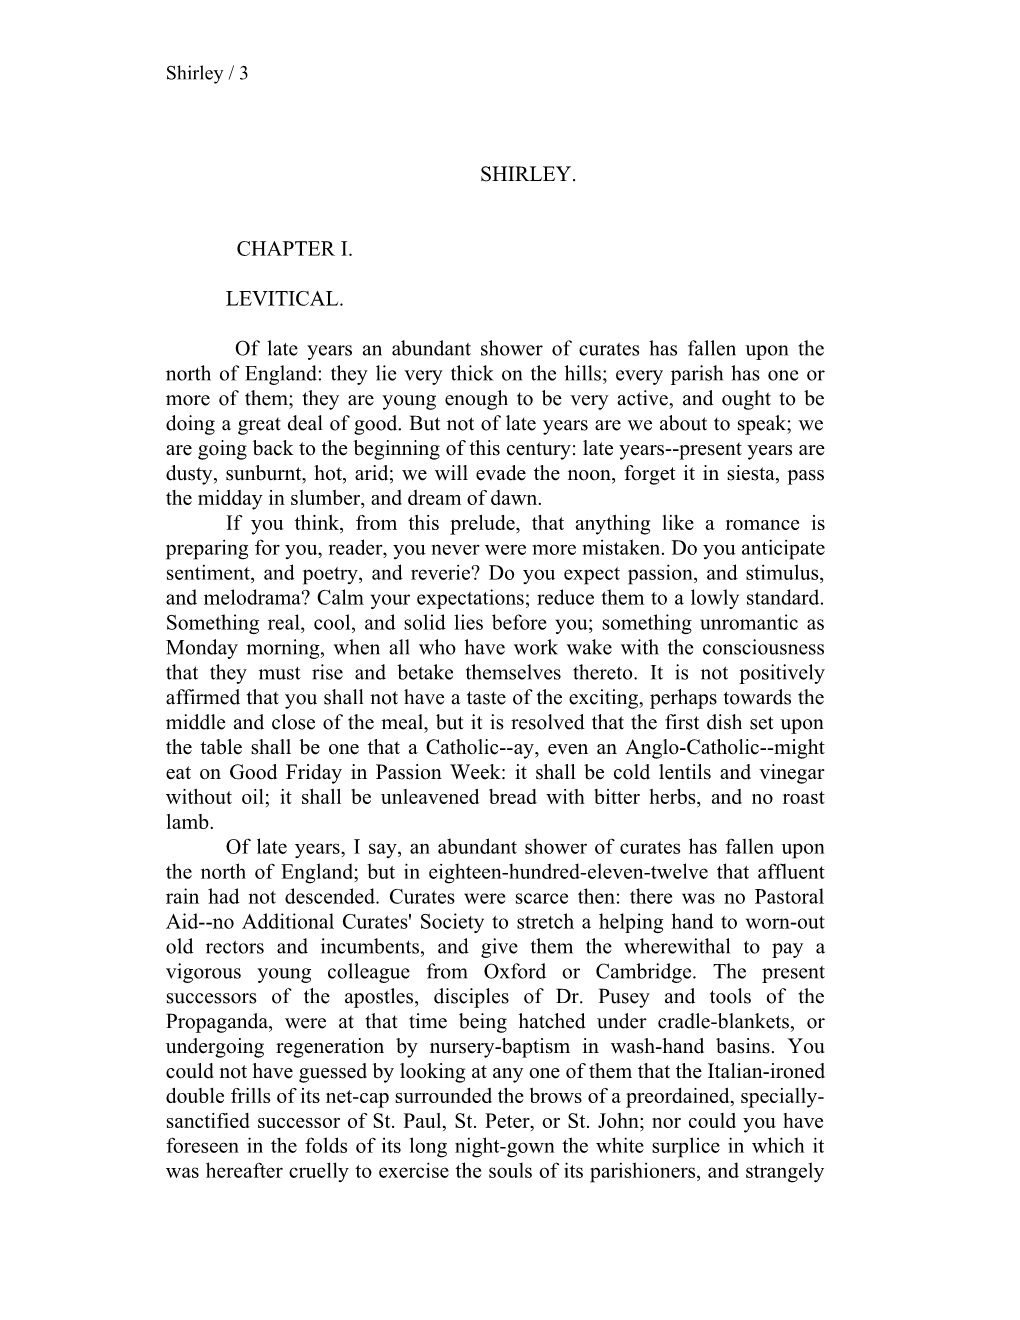 The Project Gutenberg Ebook of Shirley, by Charlotte Brontë